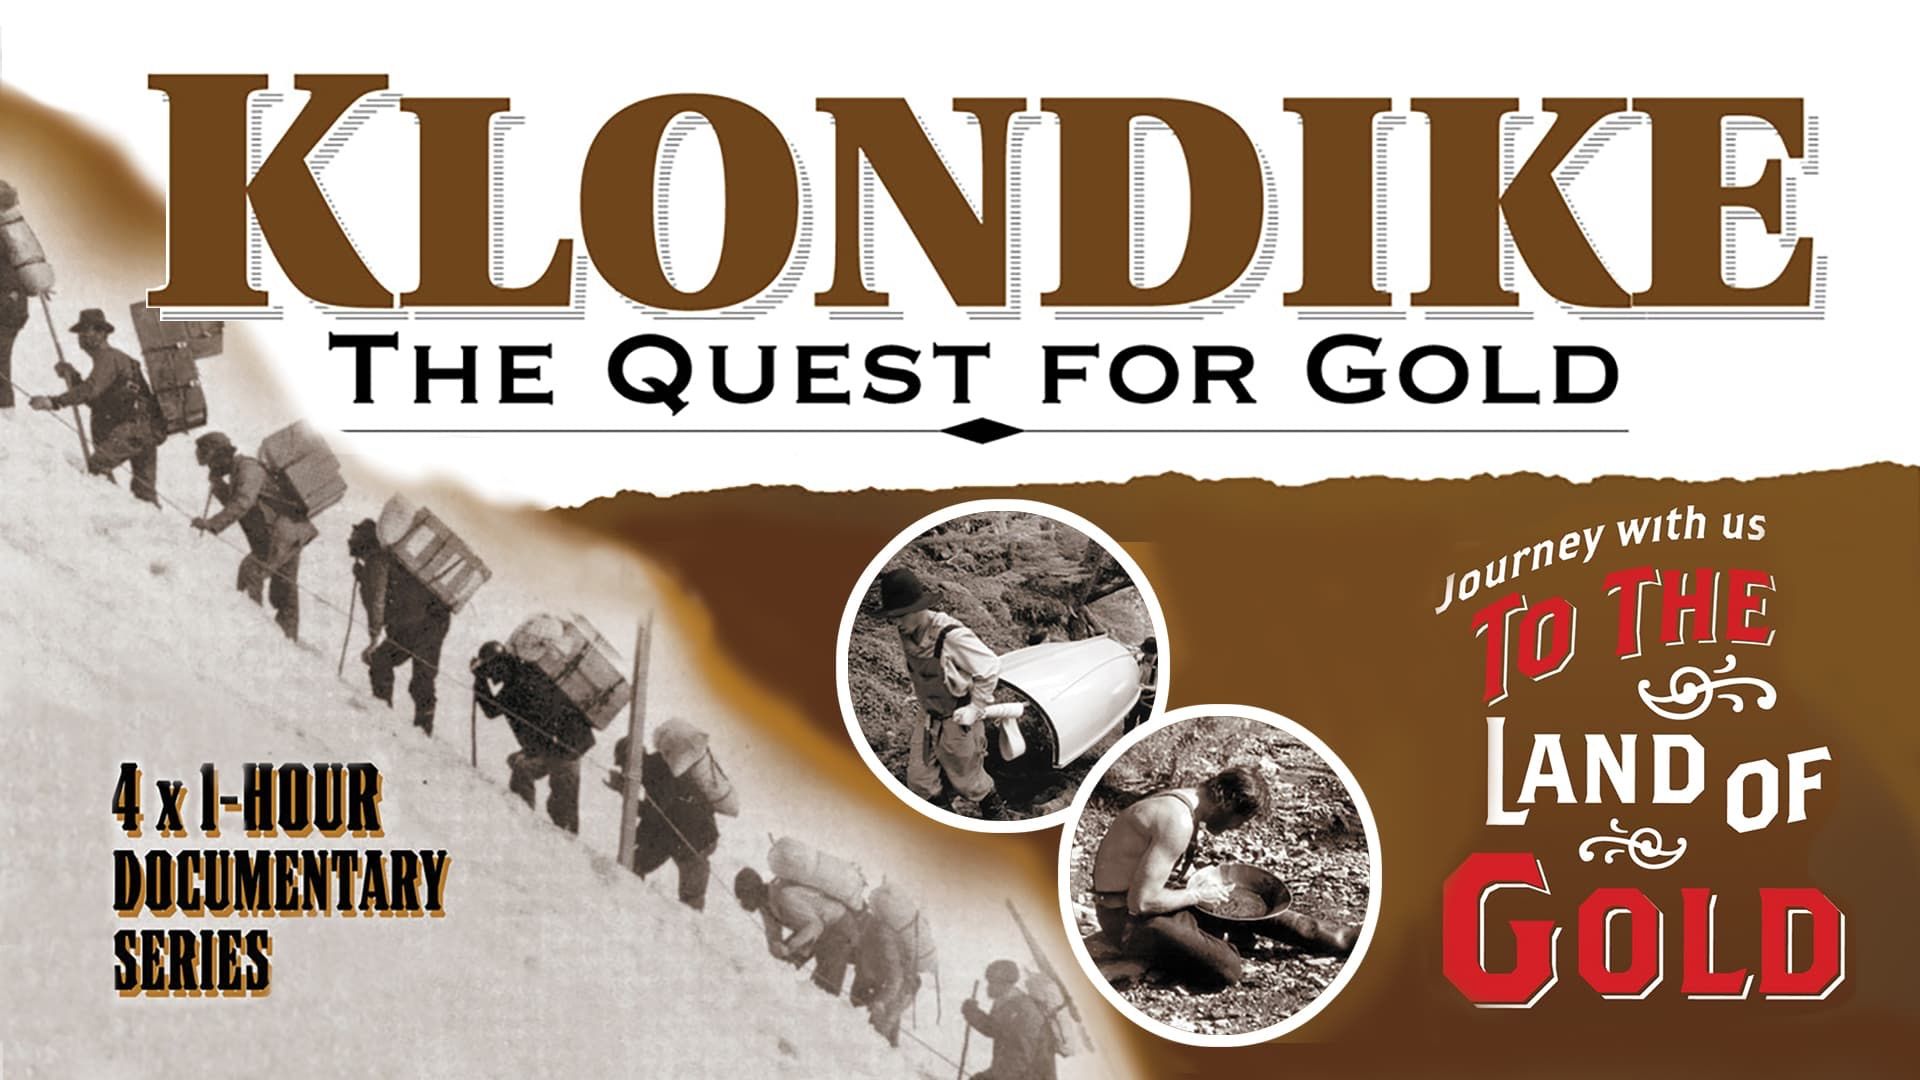 Klondike: The Quest for Gold Backdrop